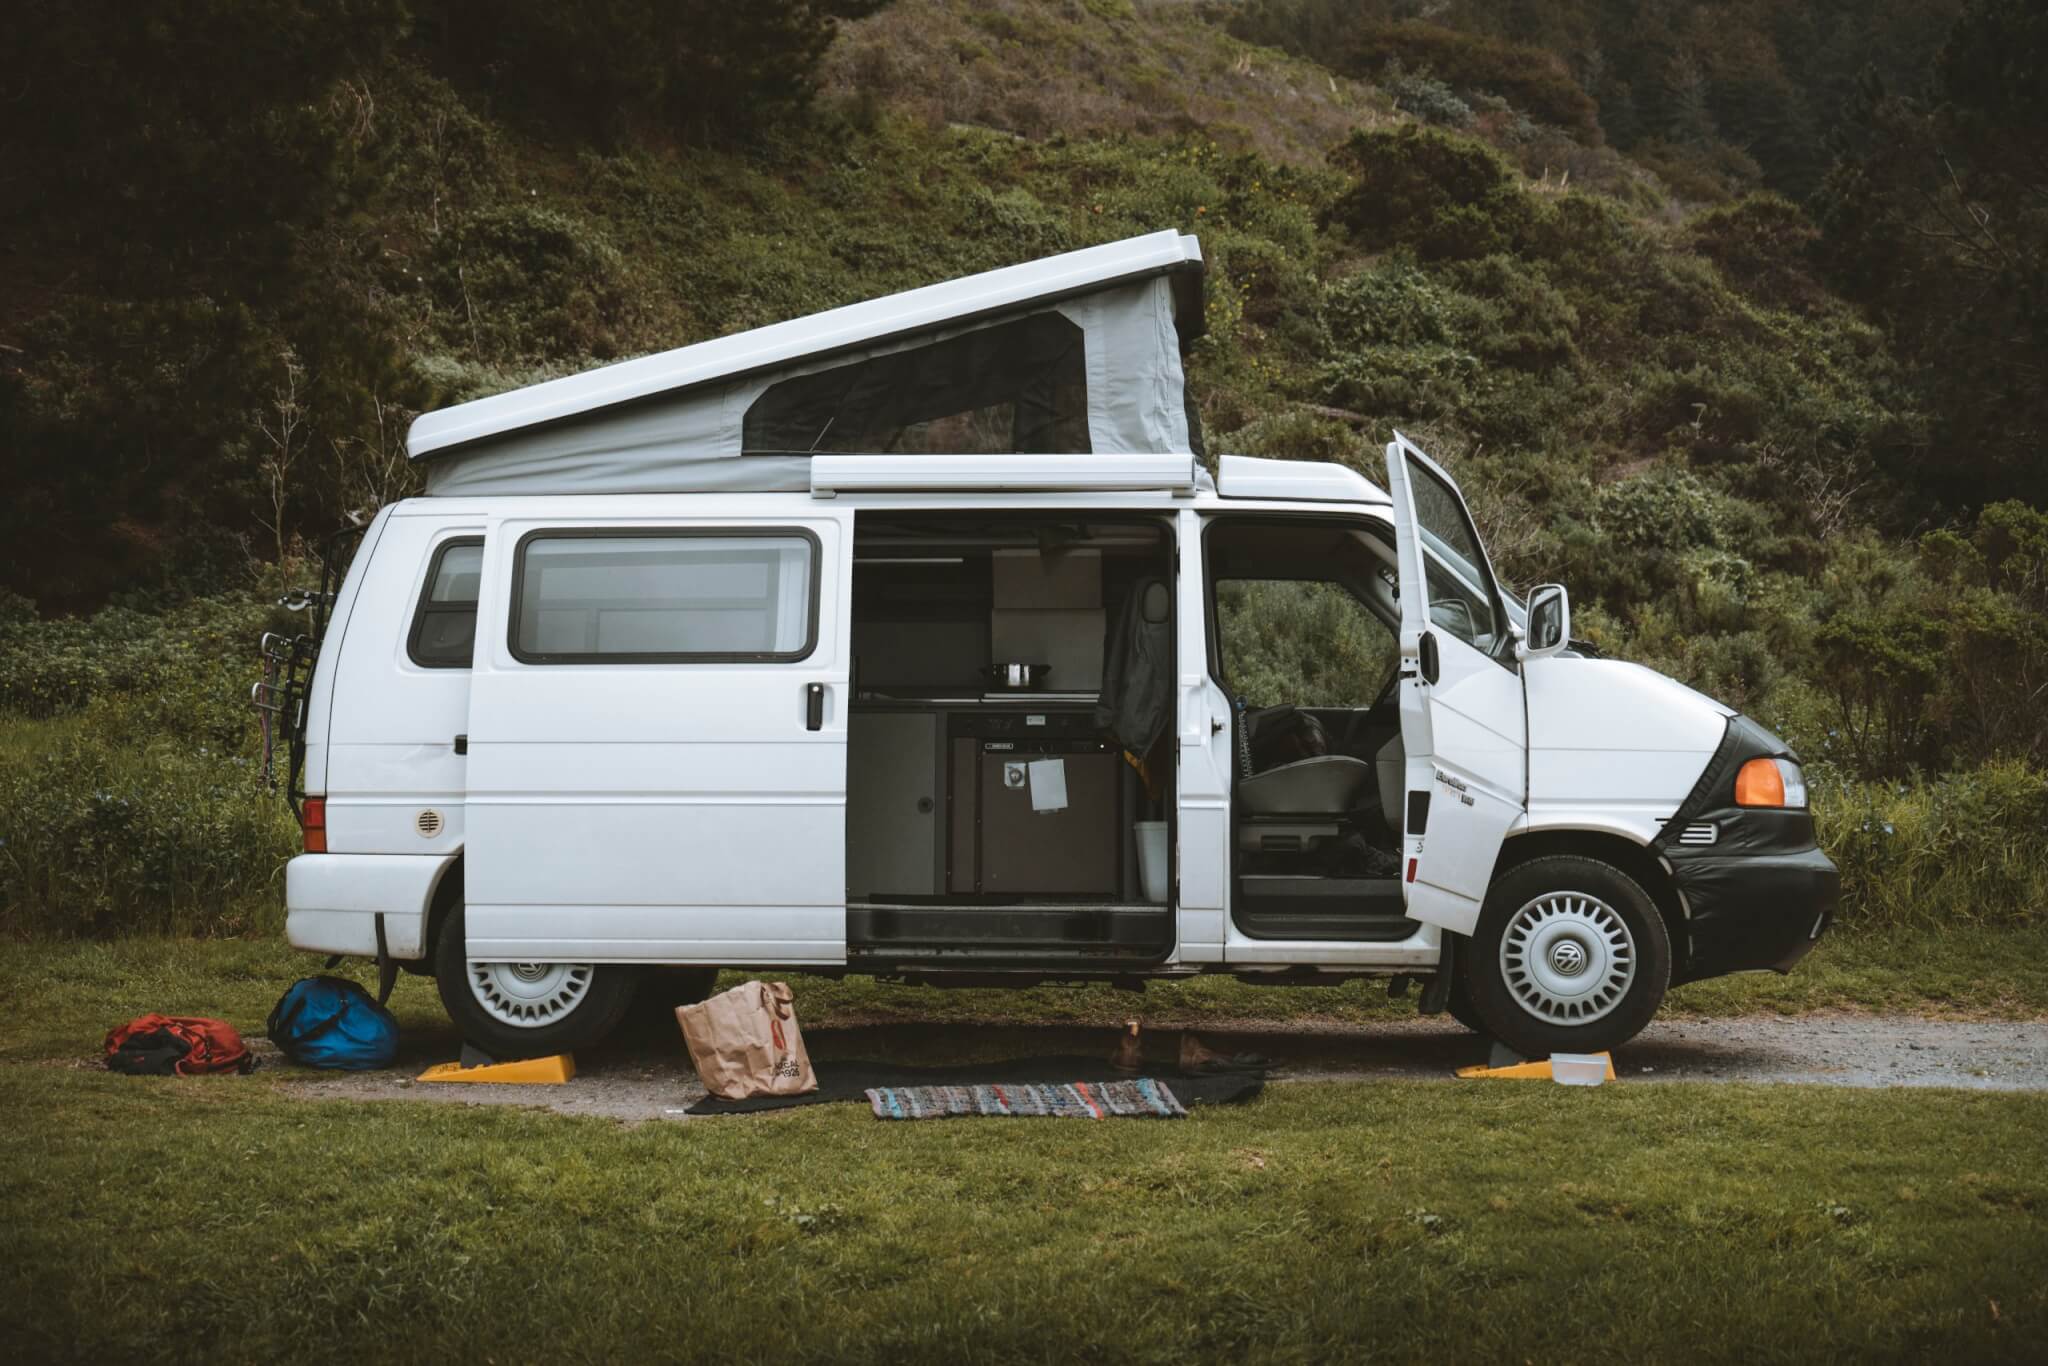 How To convert a camper van into a mobile home